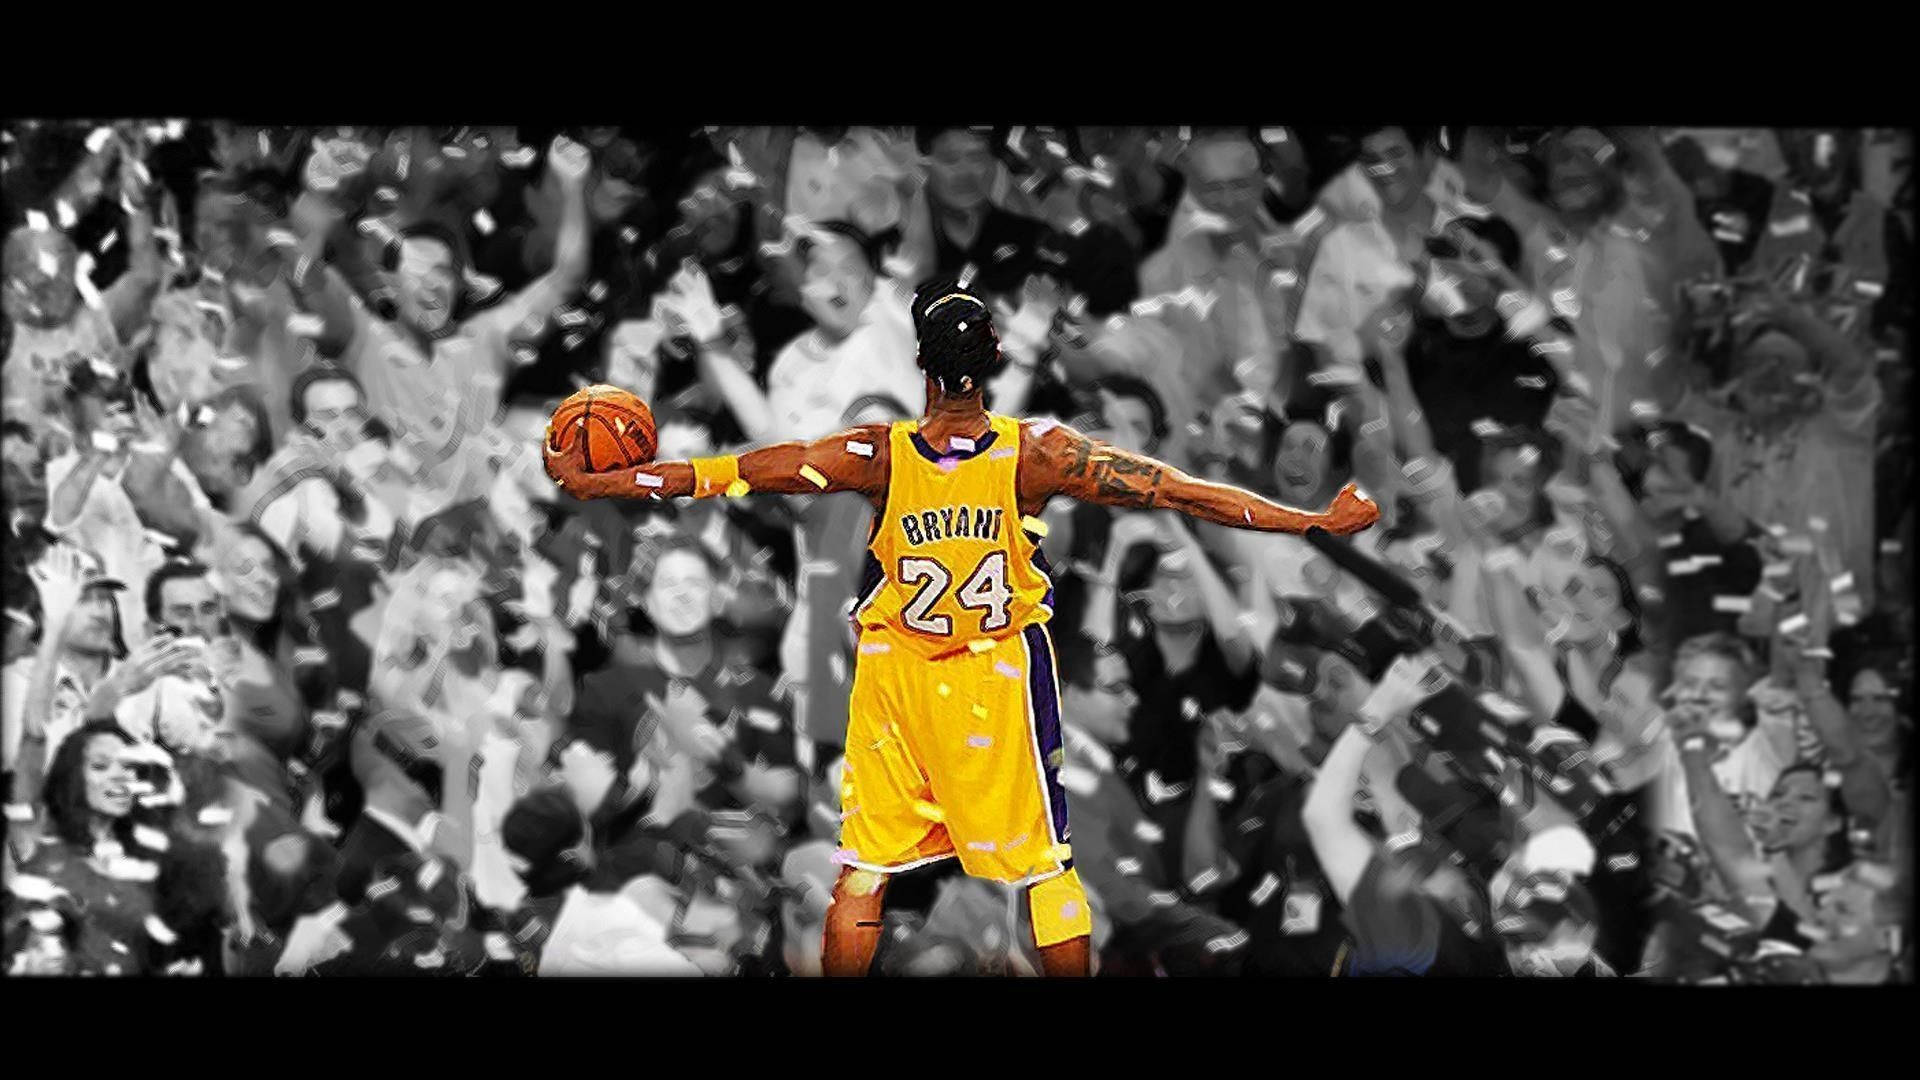 Kobe Bryant Celebrates After A Victorious Game Background